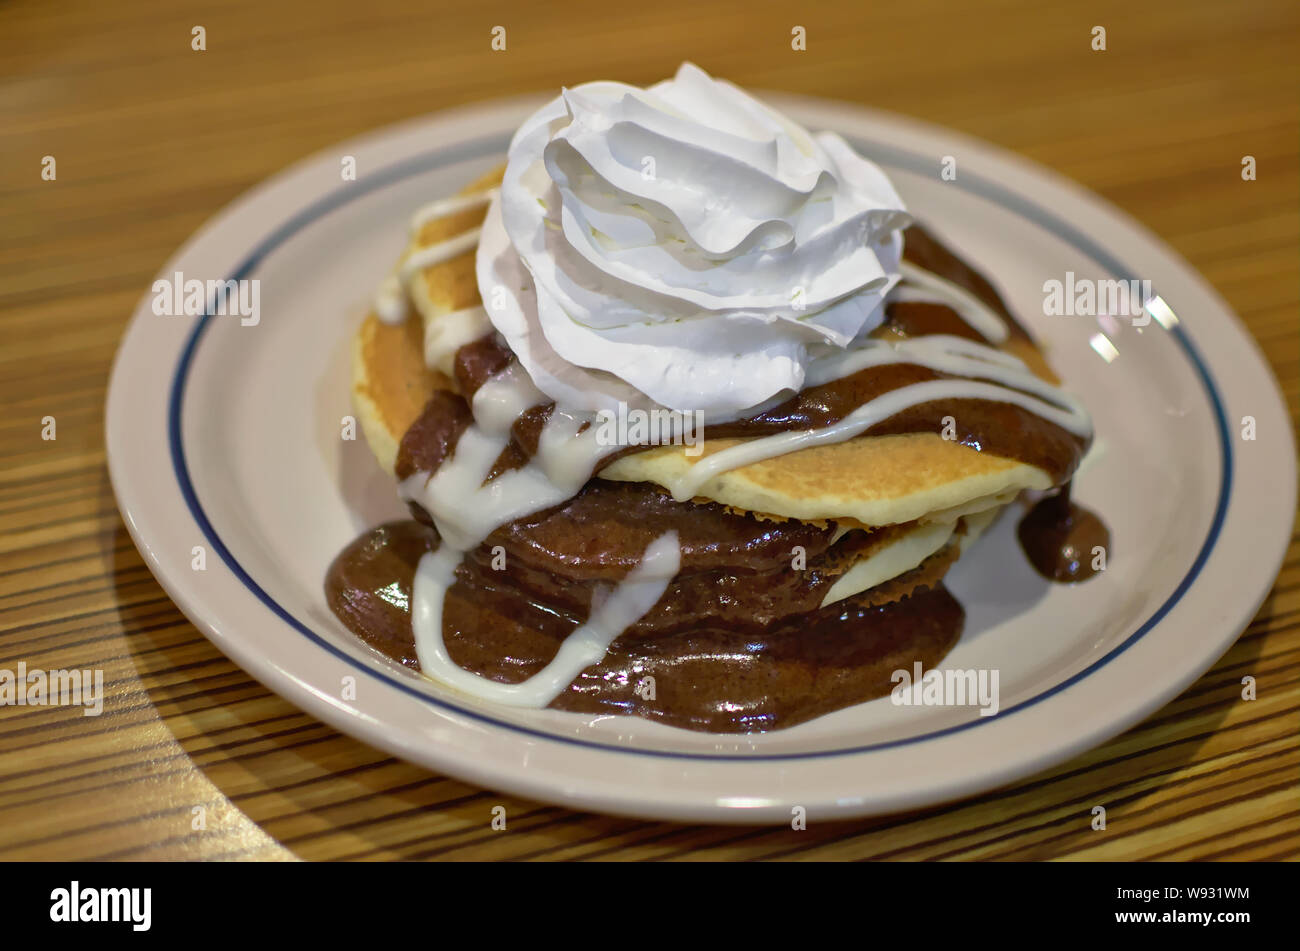 Stack of pancakes from International House of Pancakes (IHOP). Layered with a luscious cinnamon roll filling, drizzled with rich cream cheese icing. Stock Photo